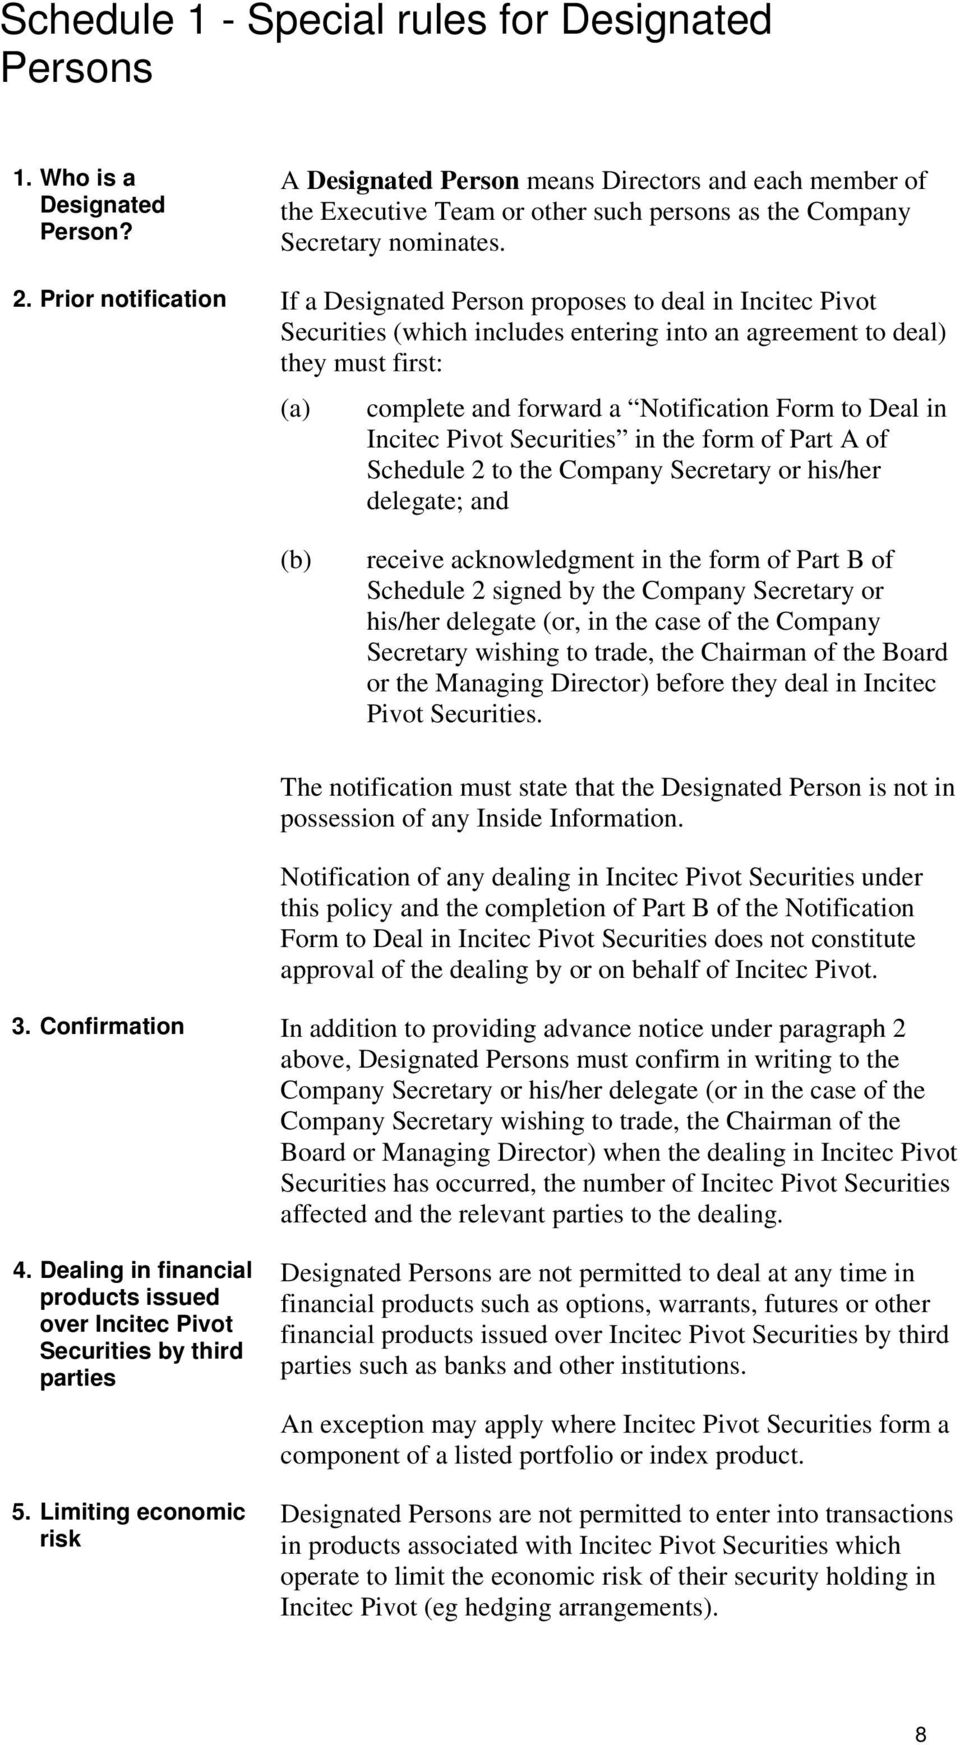 Prior notification If a Designated Person proposes to deal in Incitec Pivot Securities (which includes entering into an agreement to deal) they must first: complete and forward a Notification Form to